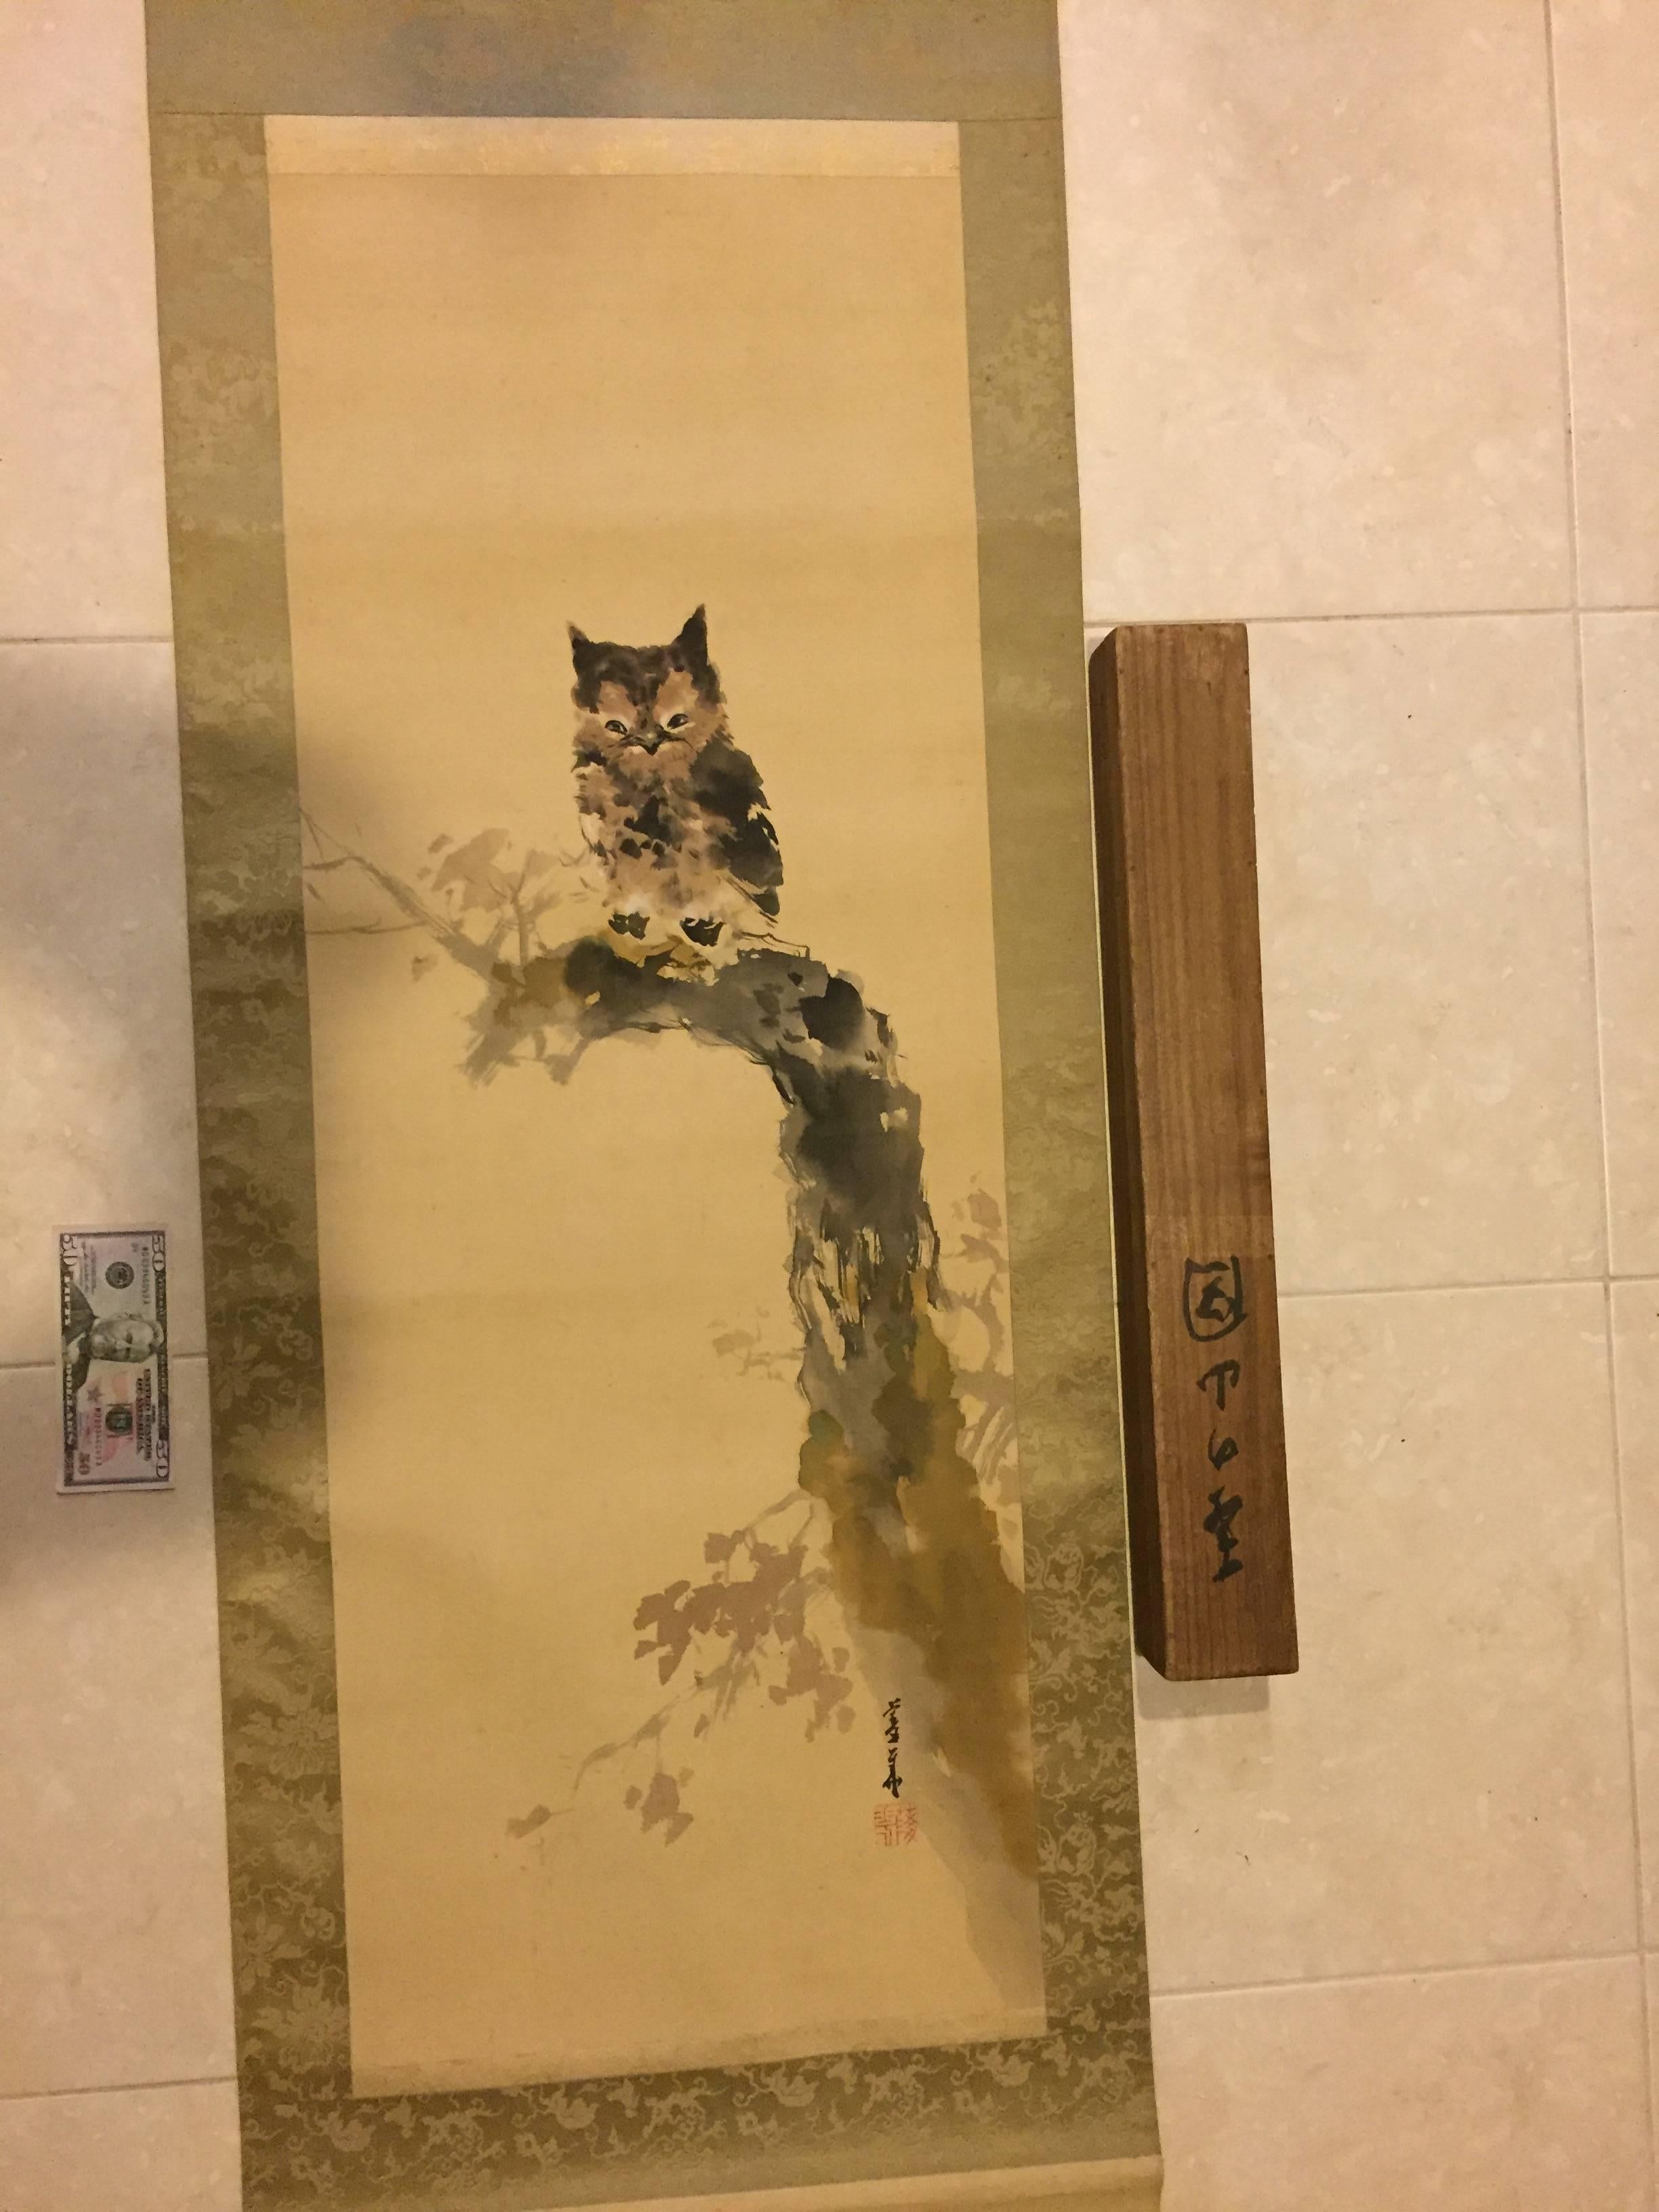 Japan, hand-painted silk scroll of an owl, signed seal of Hashimoto Ryoka, bone rollers, including rare original signed collector box,Showa period 1930s-1940s 

Dimensions: 24 inches wide and 78 inches length.

Rare subject matter, this painting is